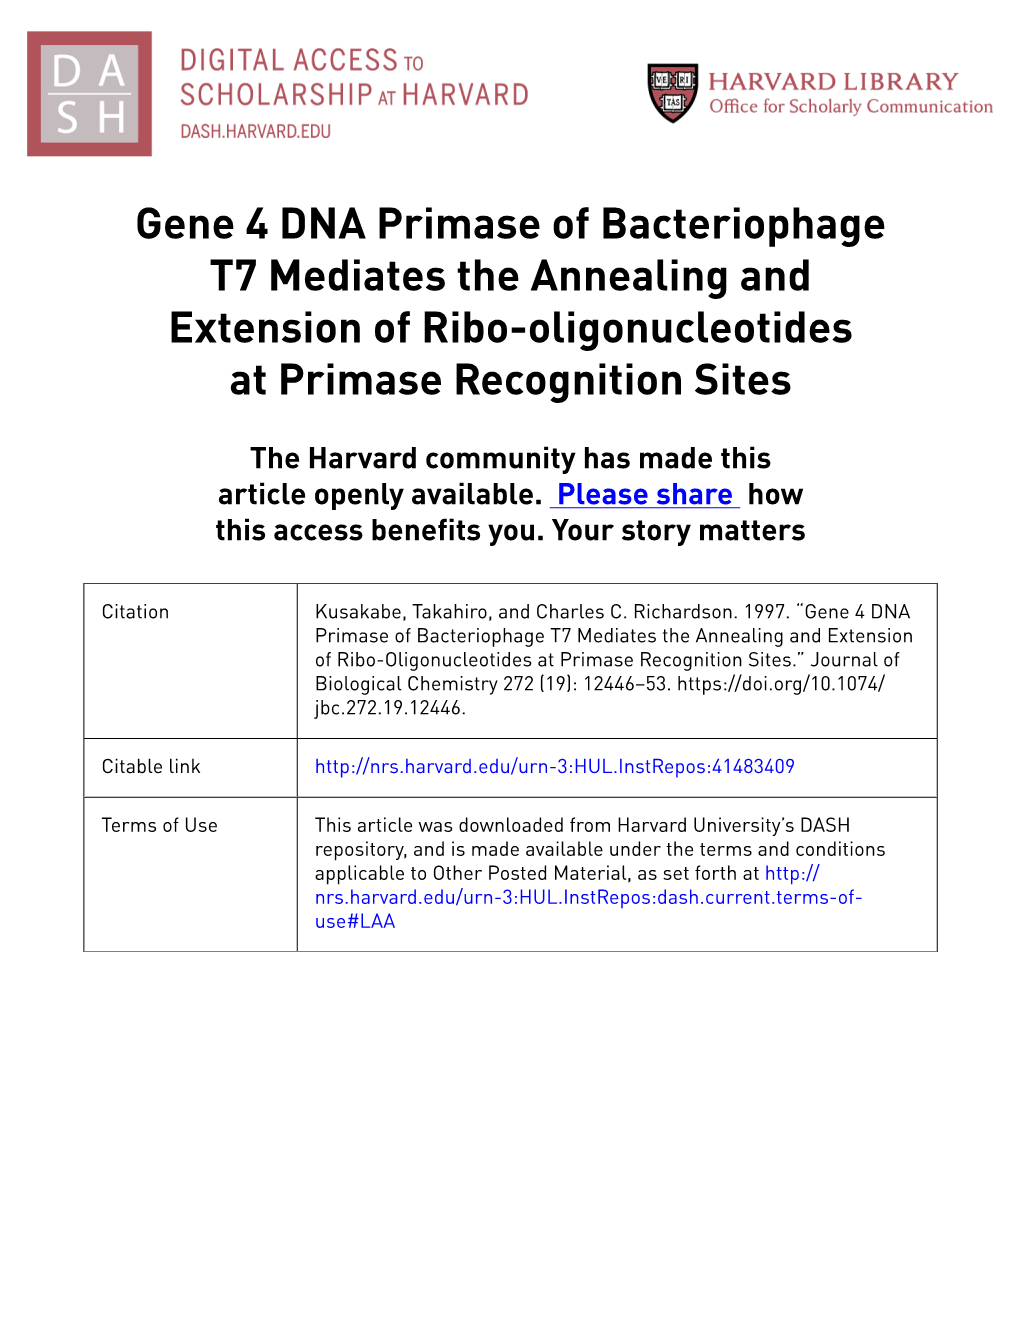 Gene 4 DNA Primase of Bacteriophage T7 Mediates the Annealing and Extension of Ribo-Oligonucleotides at Primase Recognition Sites